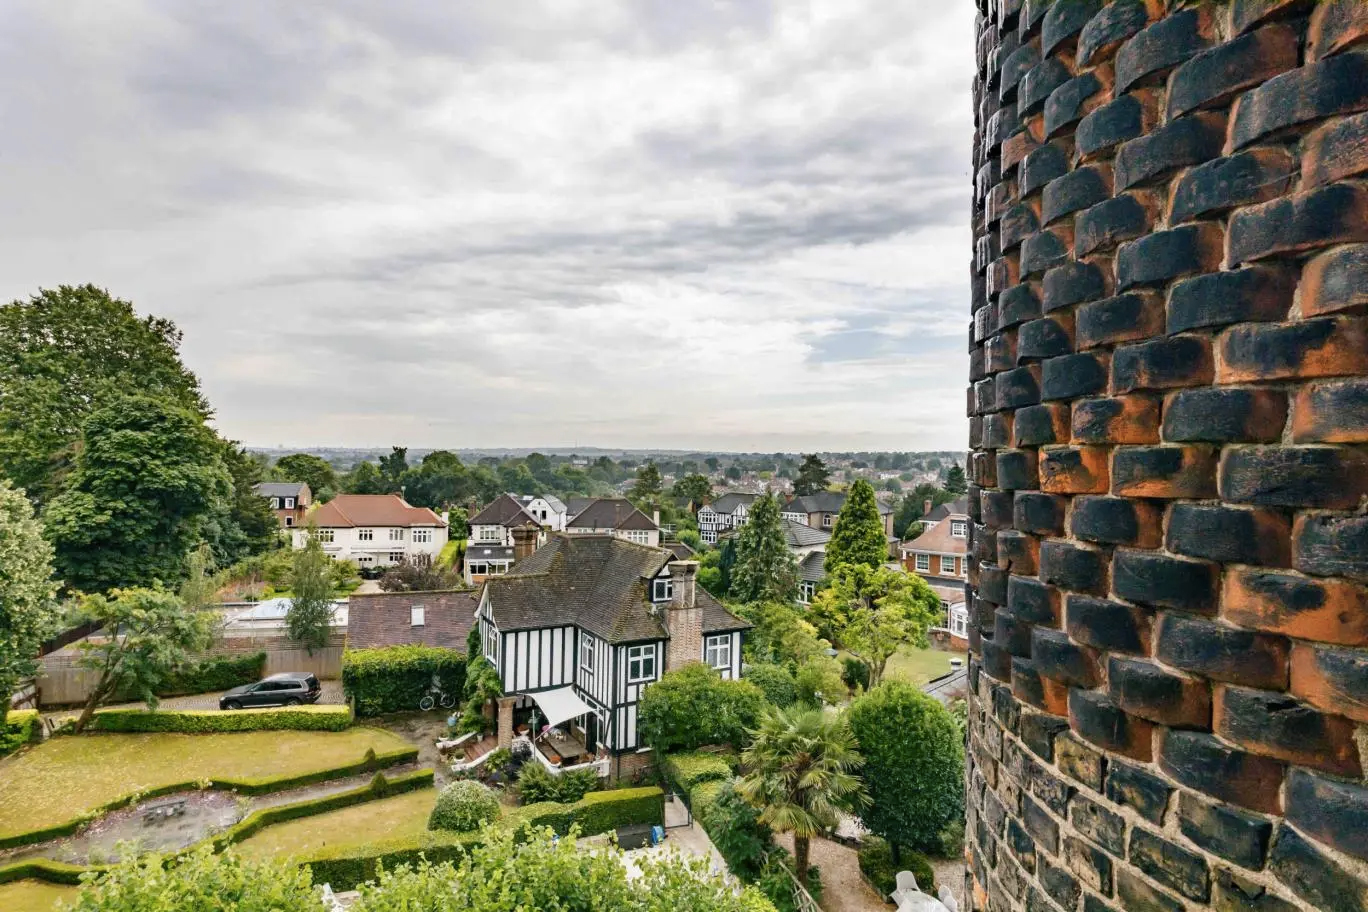 A converted water tower is for sale for the first time in 50 years in north London – but its 1970s interiors need a complete update.